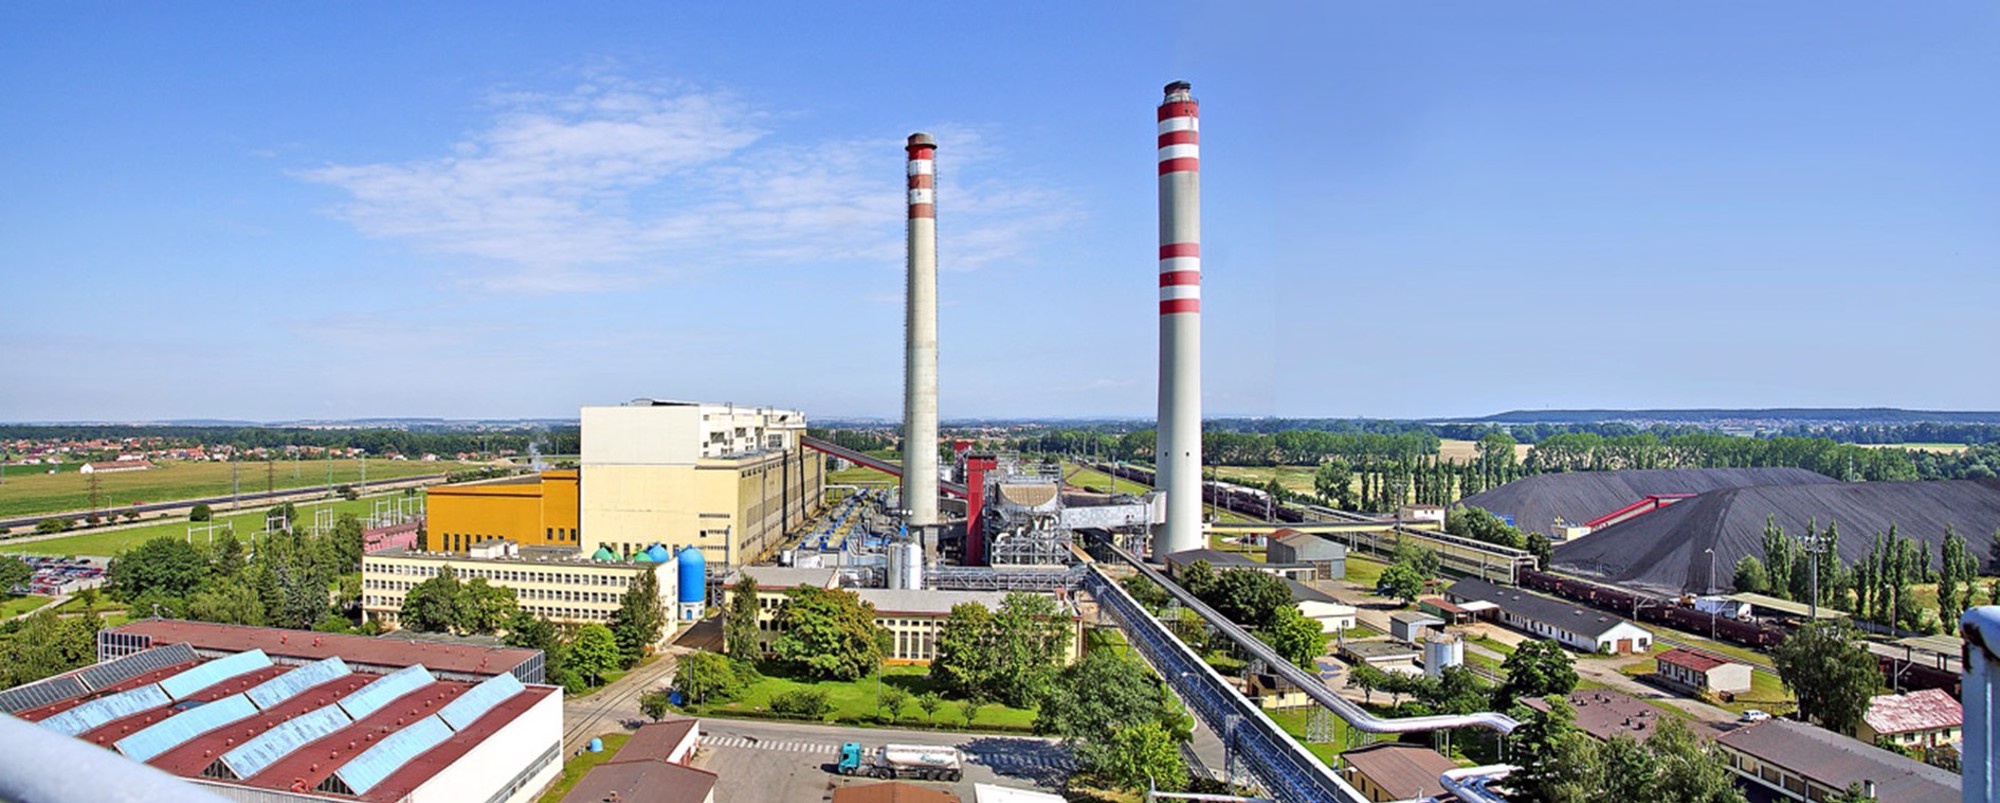 Opatovice Power Plant